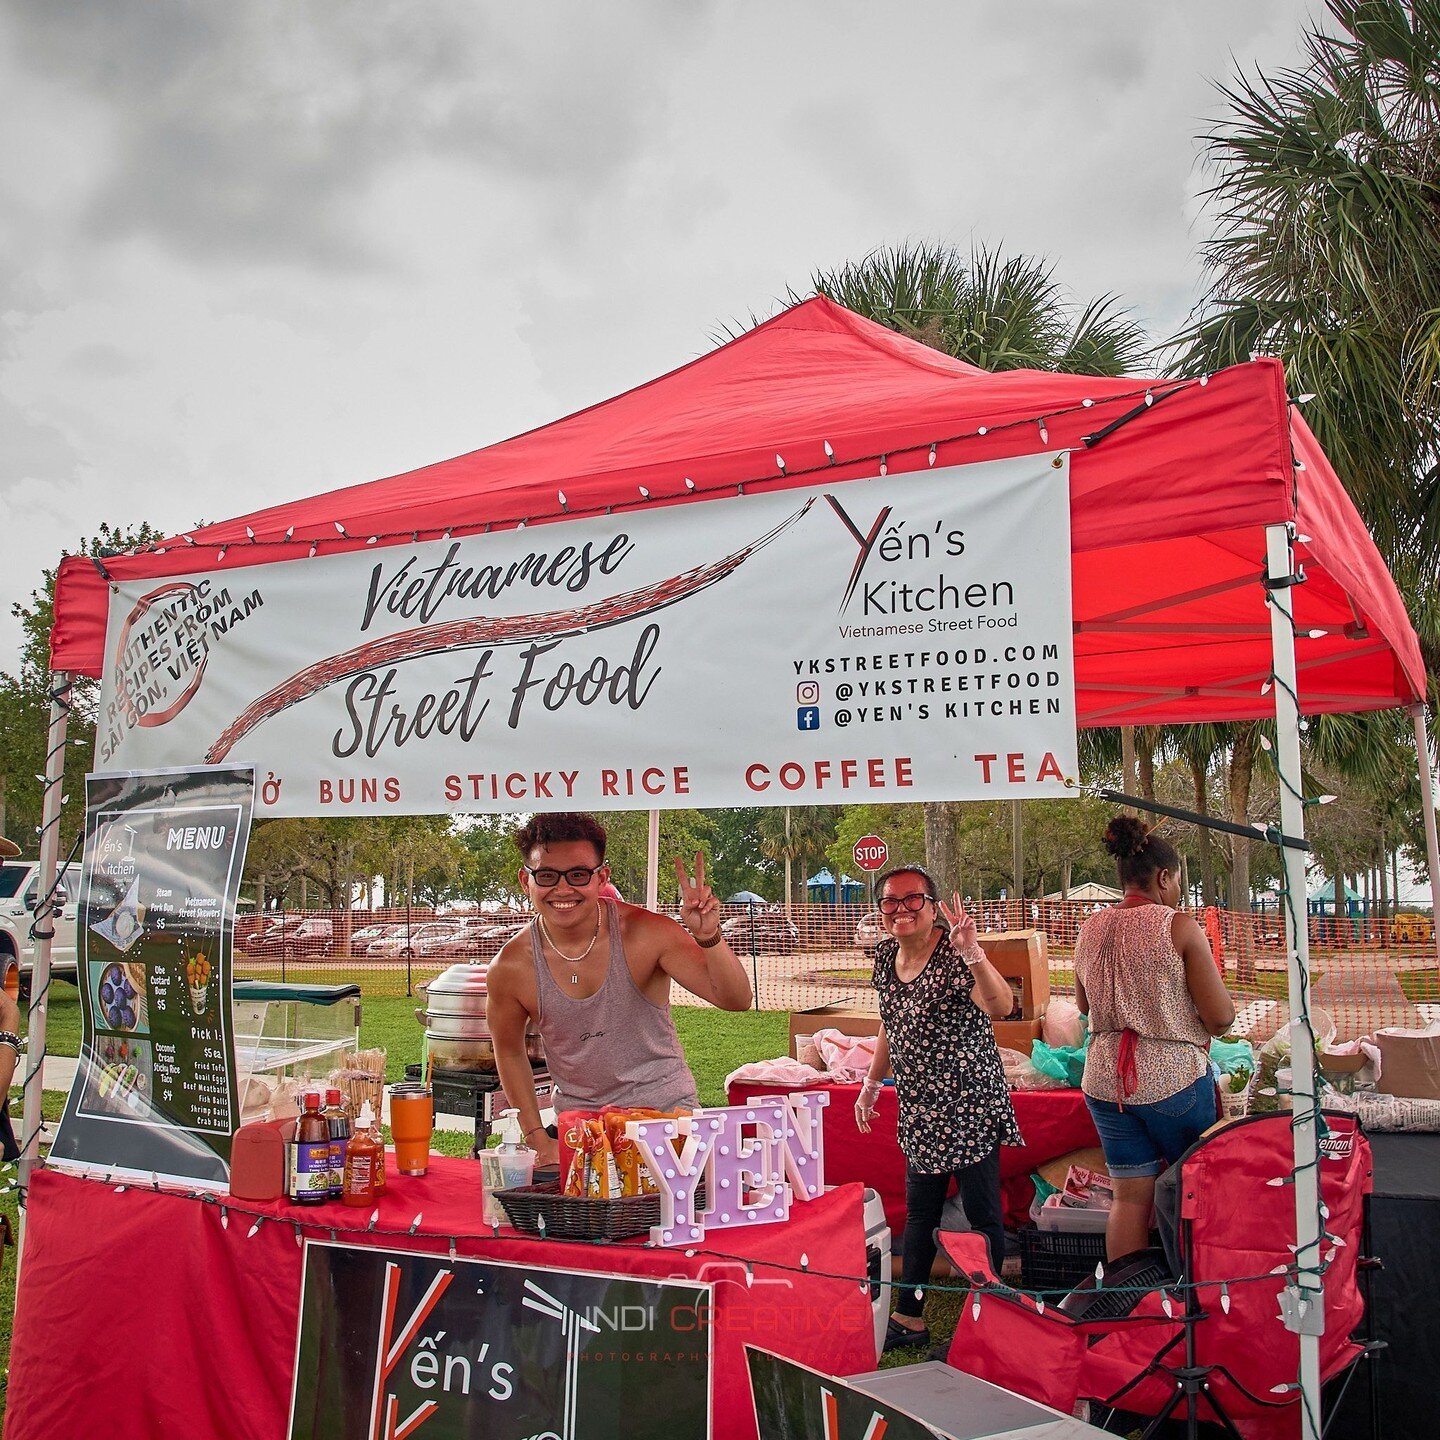 Yen's Kitchen at the inaugural Boca Food Fest &amp; Craft Fair! Yum! @ykstreetfood 
.
.
.
📸 @battlebrosevents_soflo @battlebrosevents
👉 Have Event or Branding/Commercial photography needs? Let's connect and see how I can help!
✉️ john@indi-creative